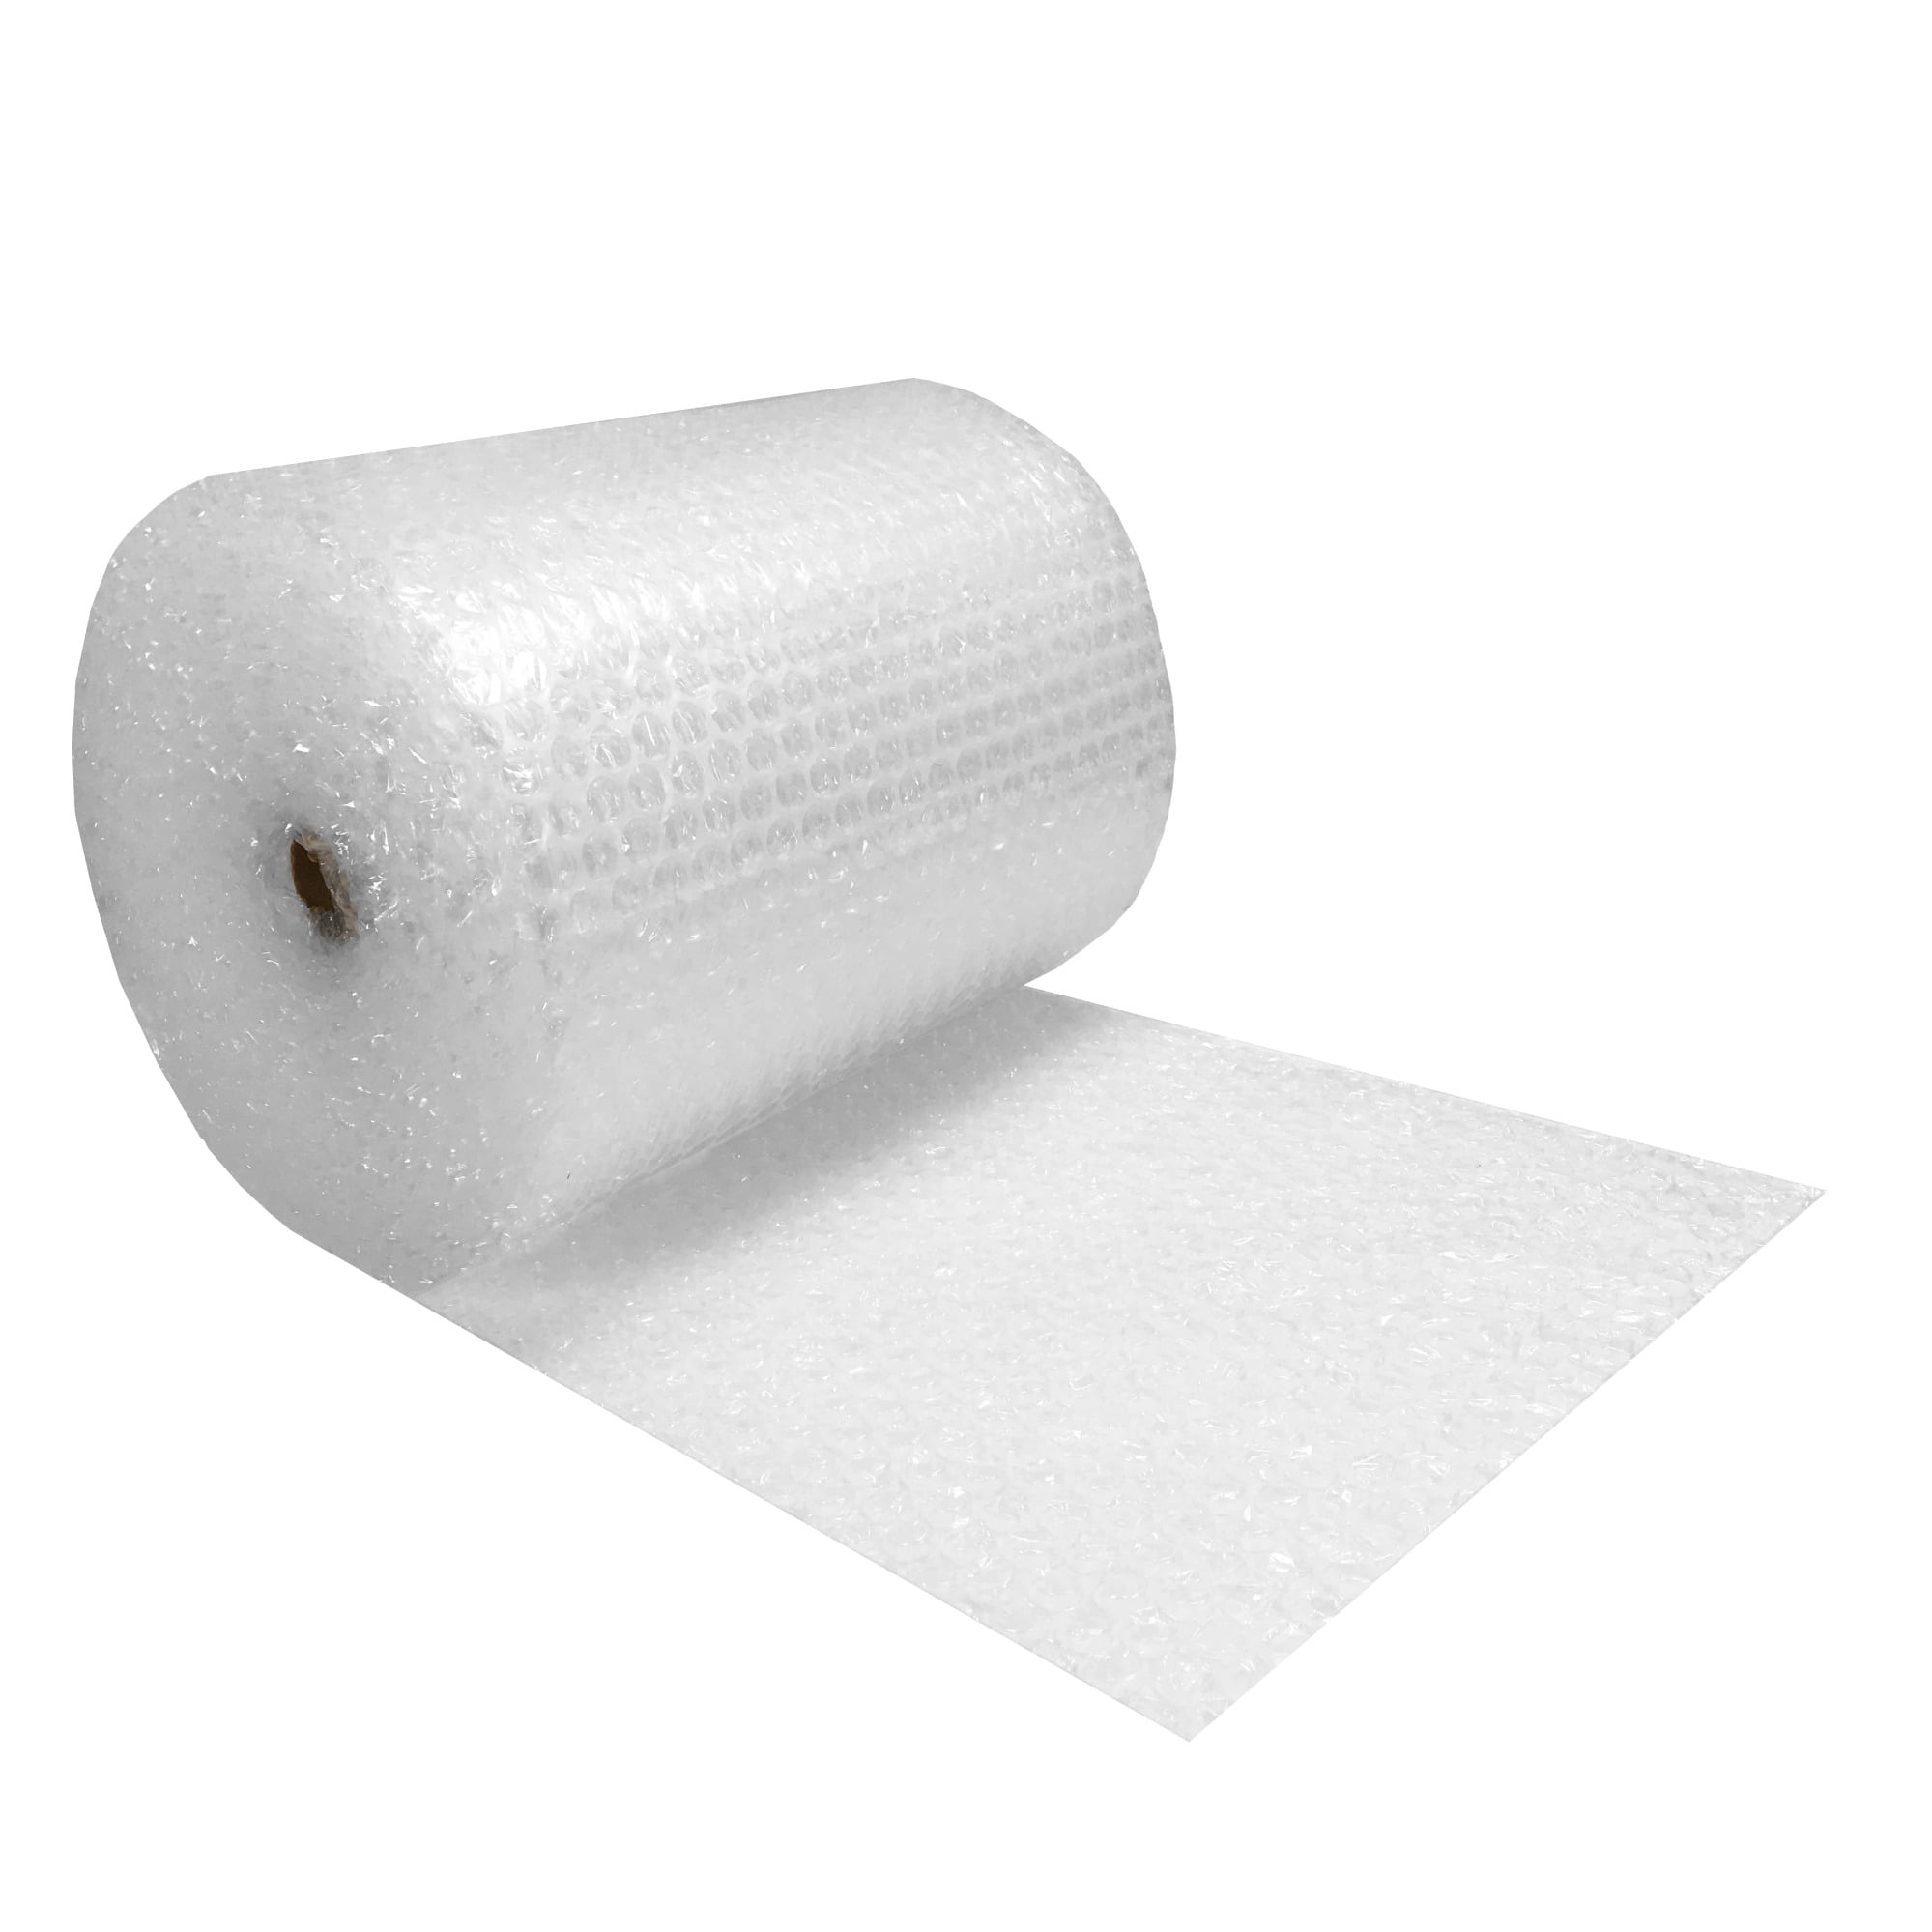 Roll of bubble wrap to Air Bubbles 100 cm x 100 M